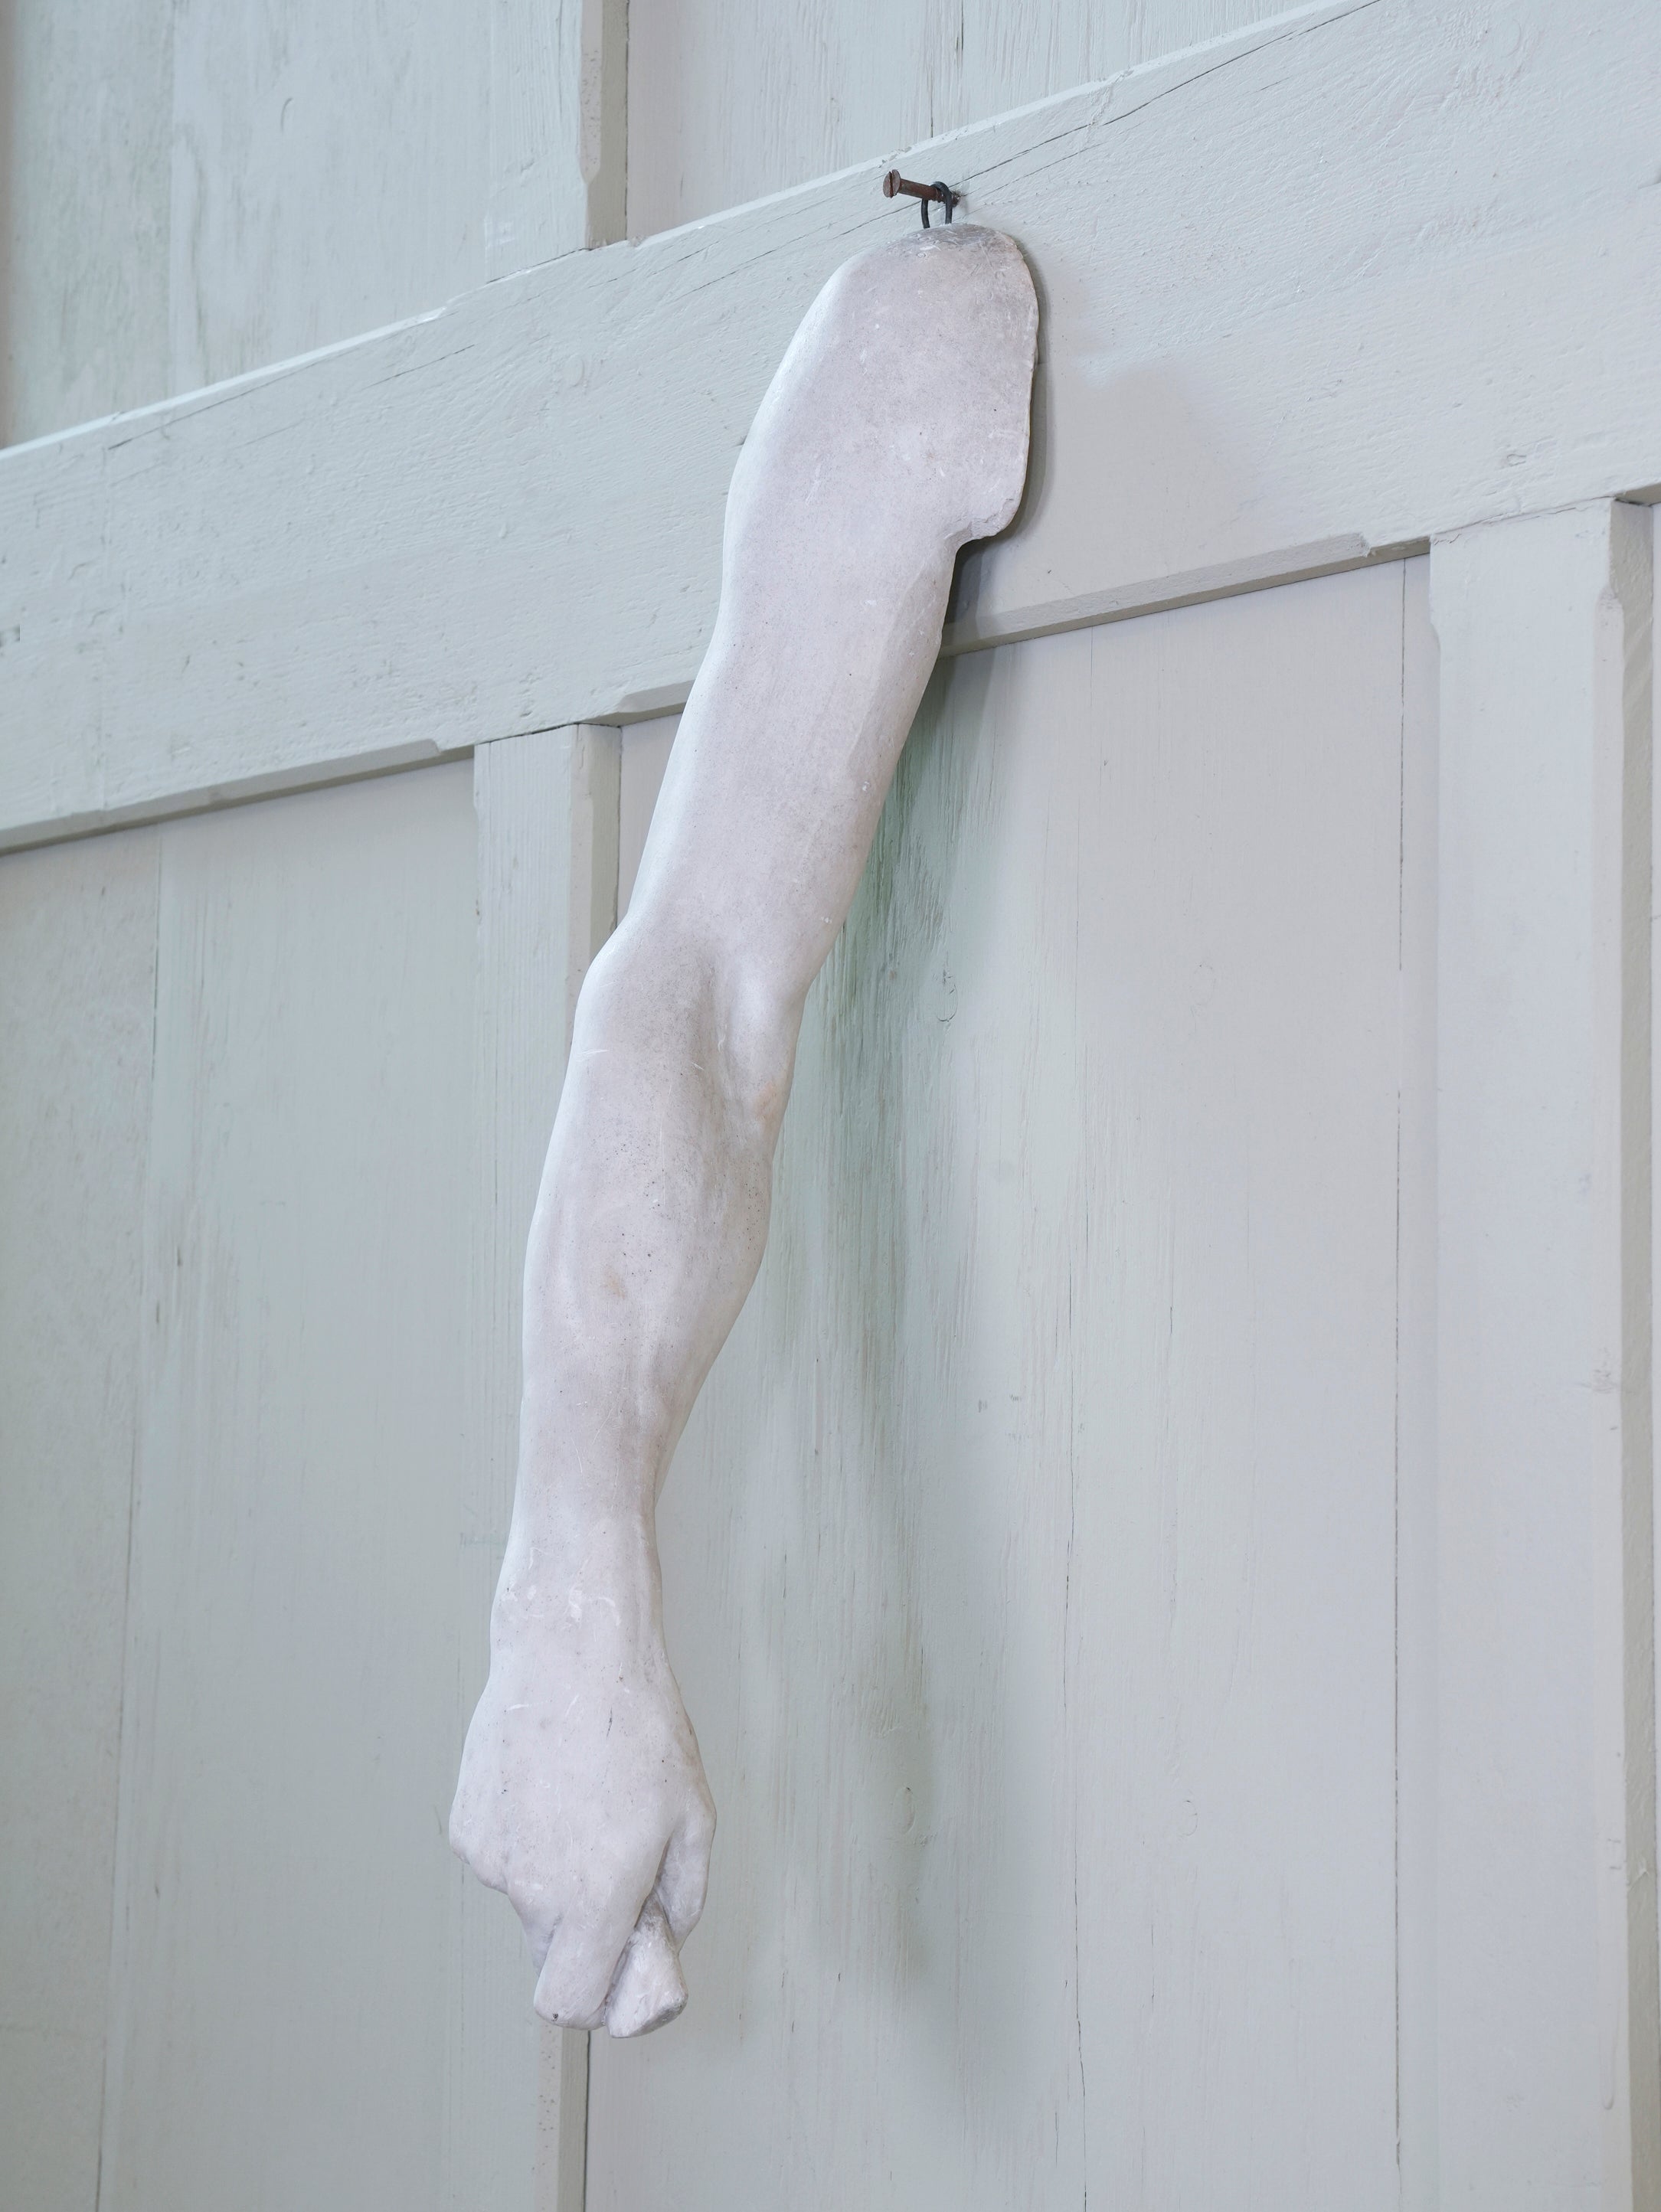 A Plaster Arm by Charles Smith.